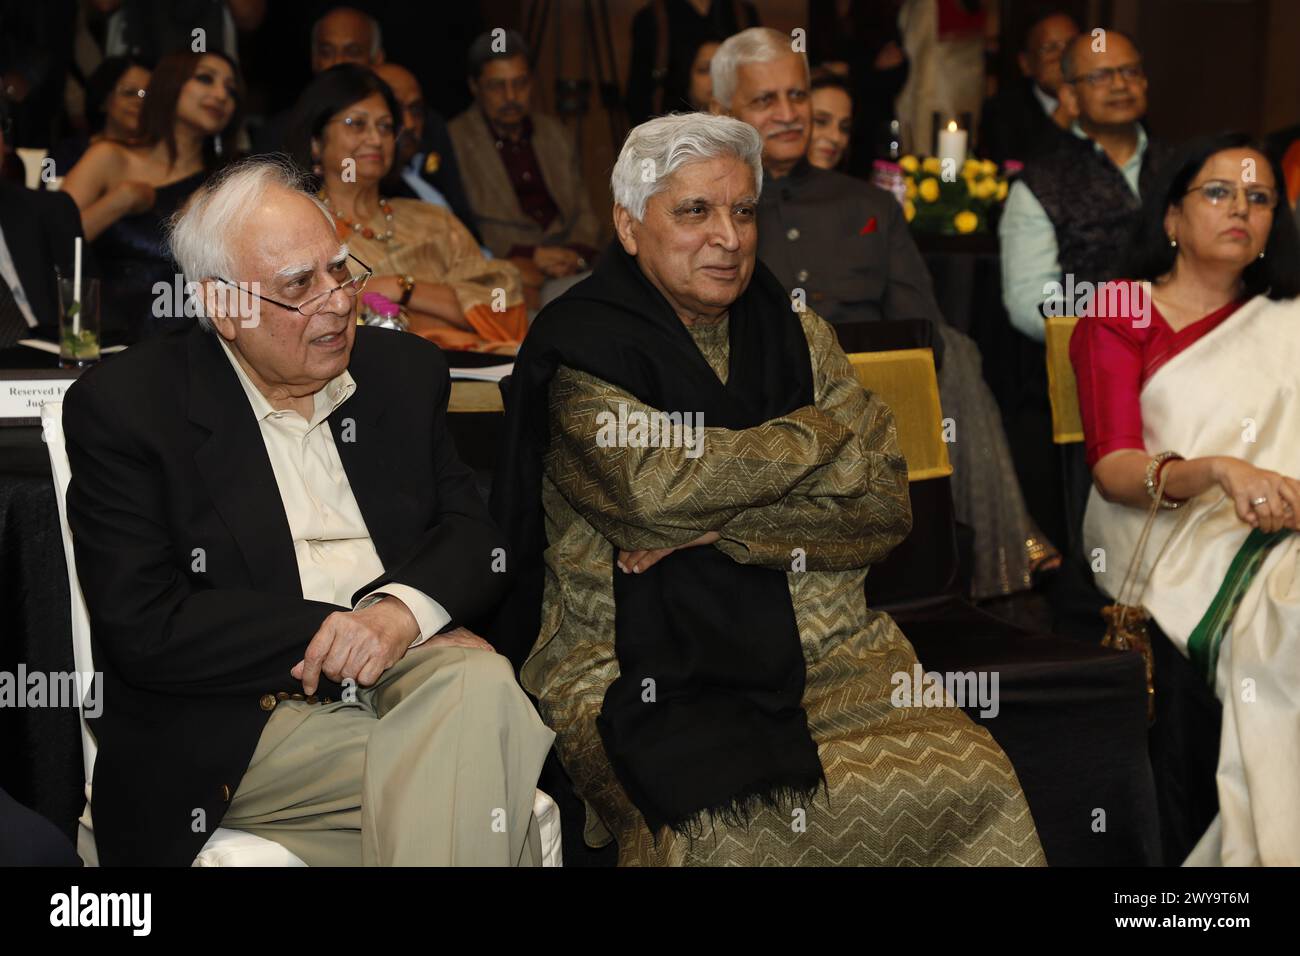 NEW DELHI, INDIA - MARCH 16: Bollywood screenwriter, lyricist and poet Javed Akhtar and Congress leader Kapil Sibal during the launch of Fali Nariman Scholarship and Annual Lecture series, organized by Mohit Saraf, founder of Saraf and Partners, on March 16, 2024 in New Delhi, India. (Photo by Shantanu Bhattacharya/Hindustan Times/Sipa USA ) Stock Photo